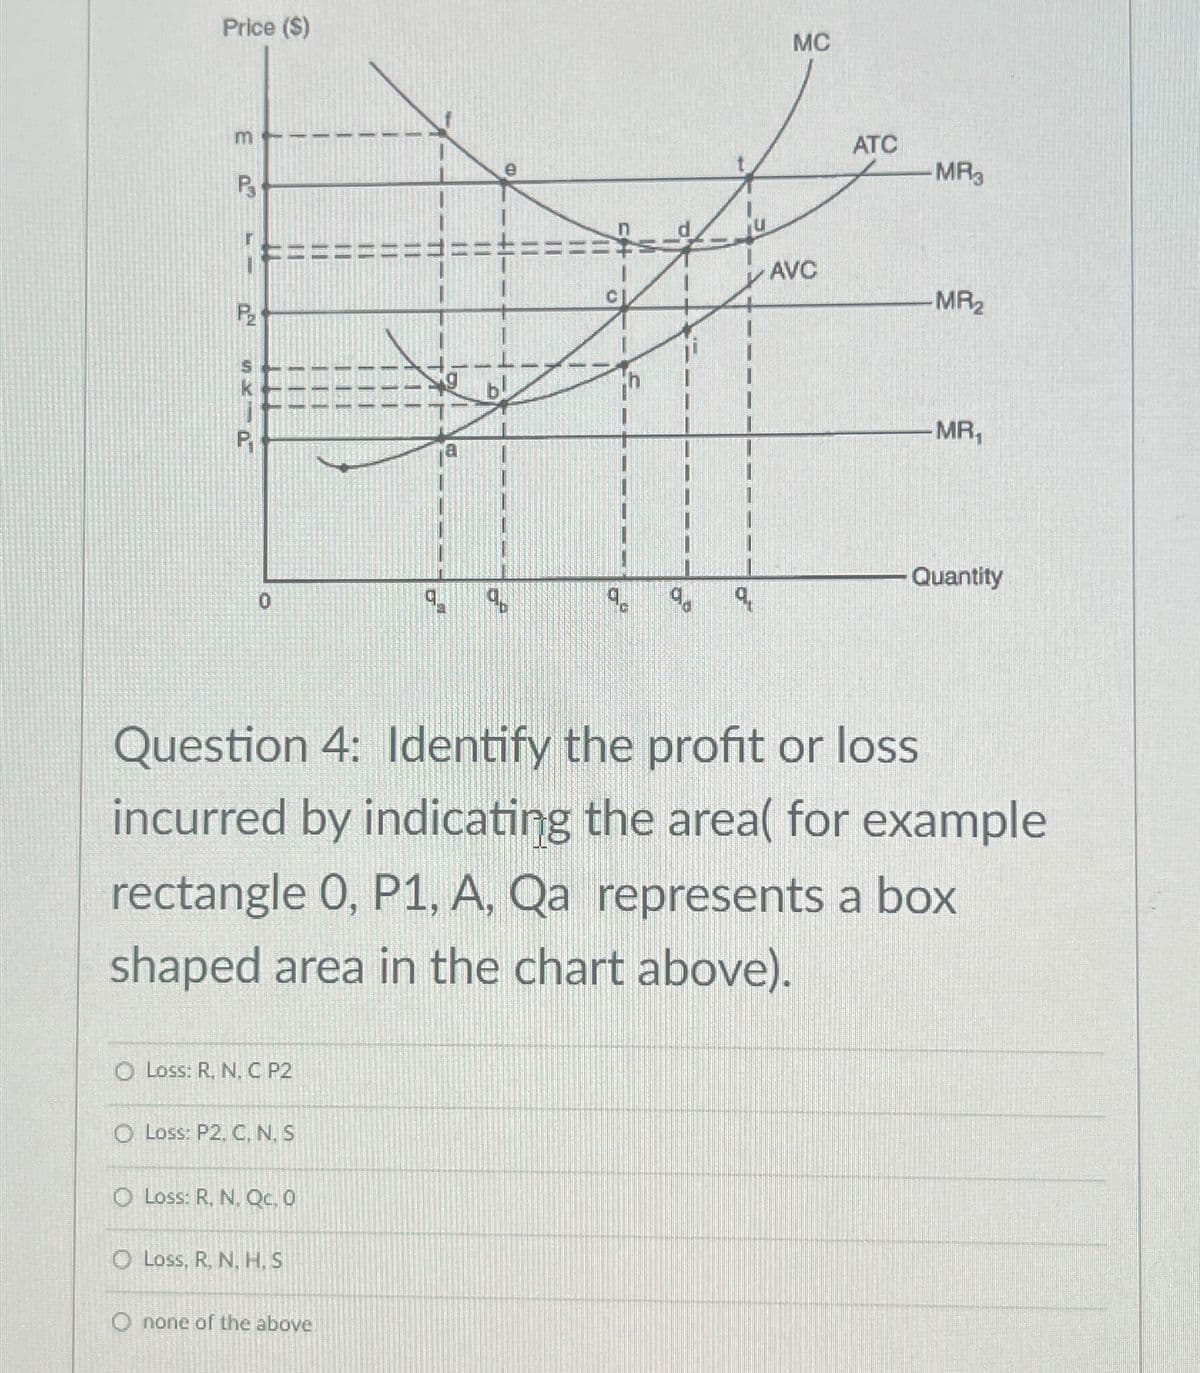 Price ($)
E
P3
P₂
11
11
Π
n+
MC
of
ATC
MR3
AVC
MR₂
-MR₁
Quantity
Question 4: Identify the profit or loss
incurred by indicating the area( for example
rectangle 0, P1, A, Qa represents a box
shaped area in the chart above).
O Loss: R, N, C P2
O Loss: P2, C, N, S
O Loss: R, N, Qc, 0
O Loss, R, N, H. S
O none of the above